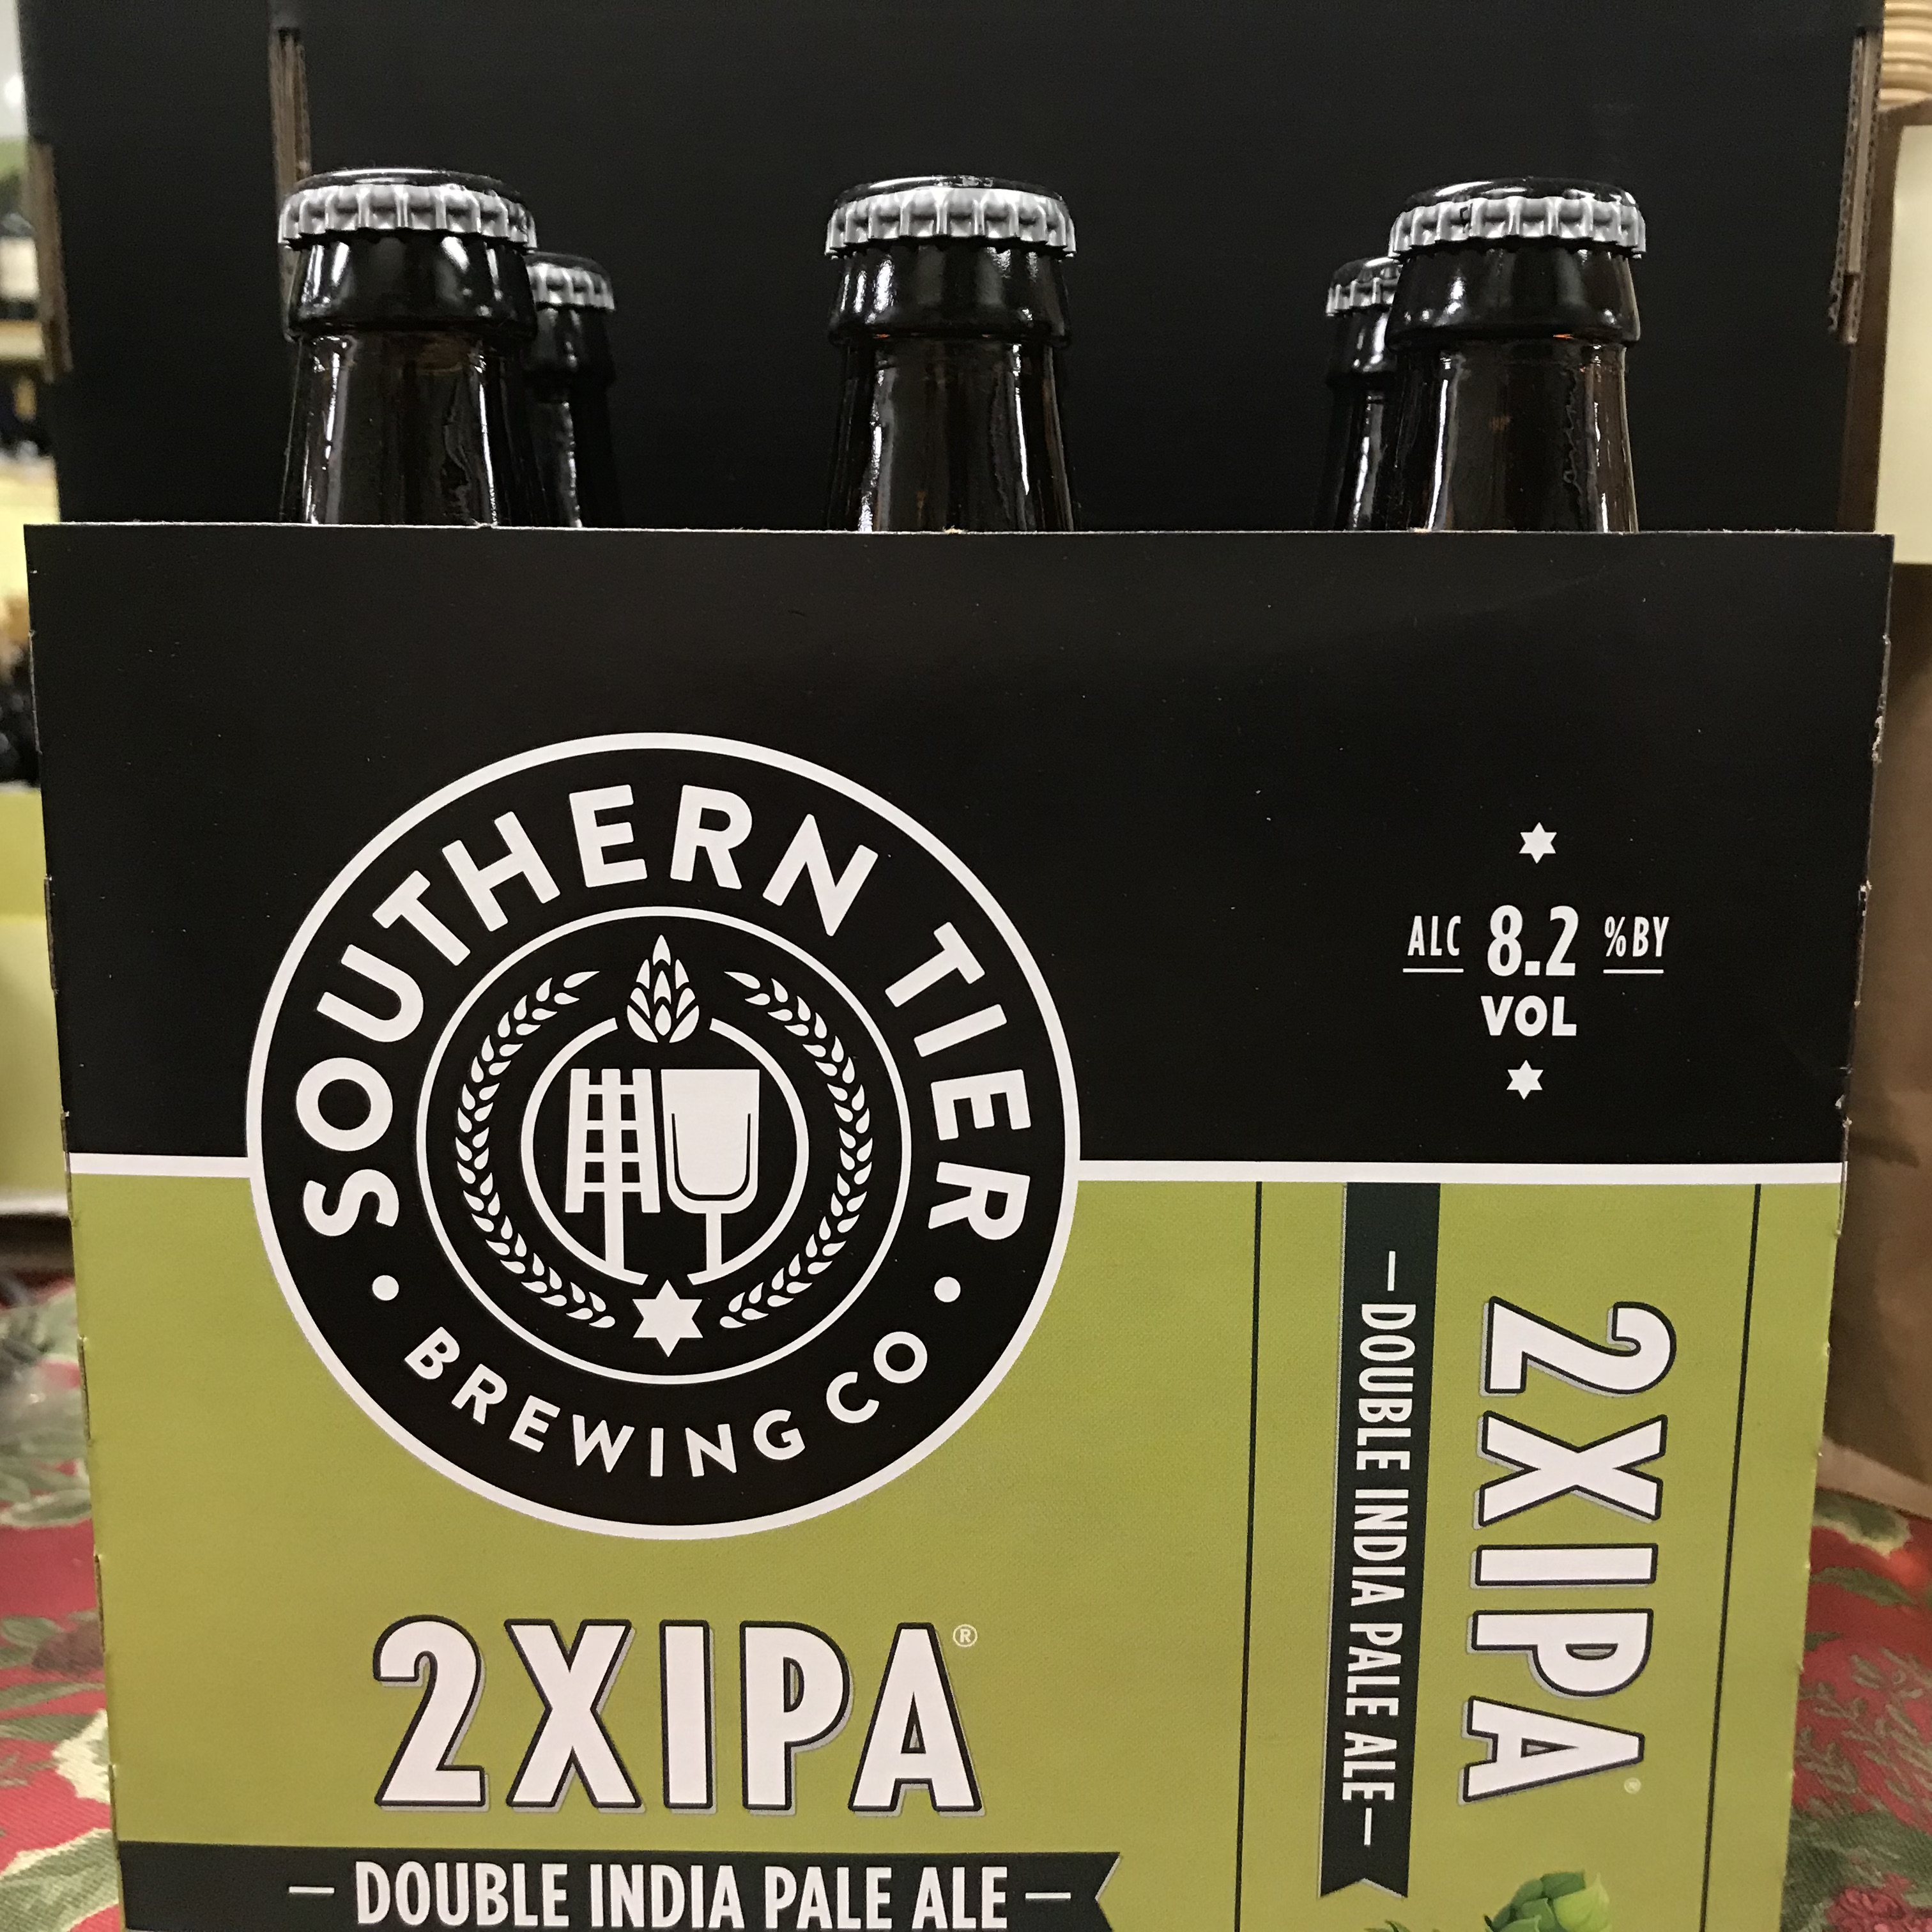 Southern Tier 2 x IPA (Double) 6 bottles 12 oz